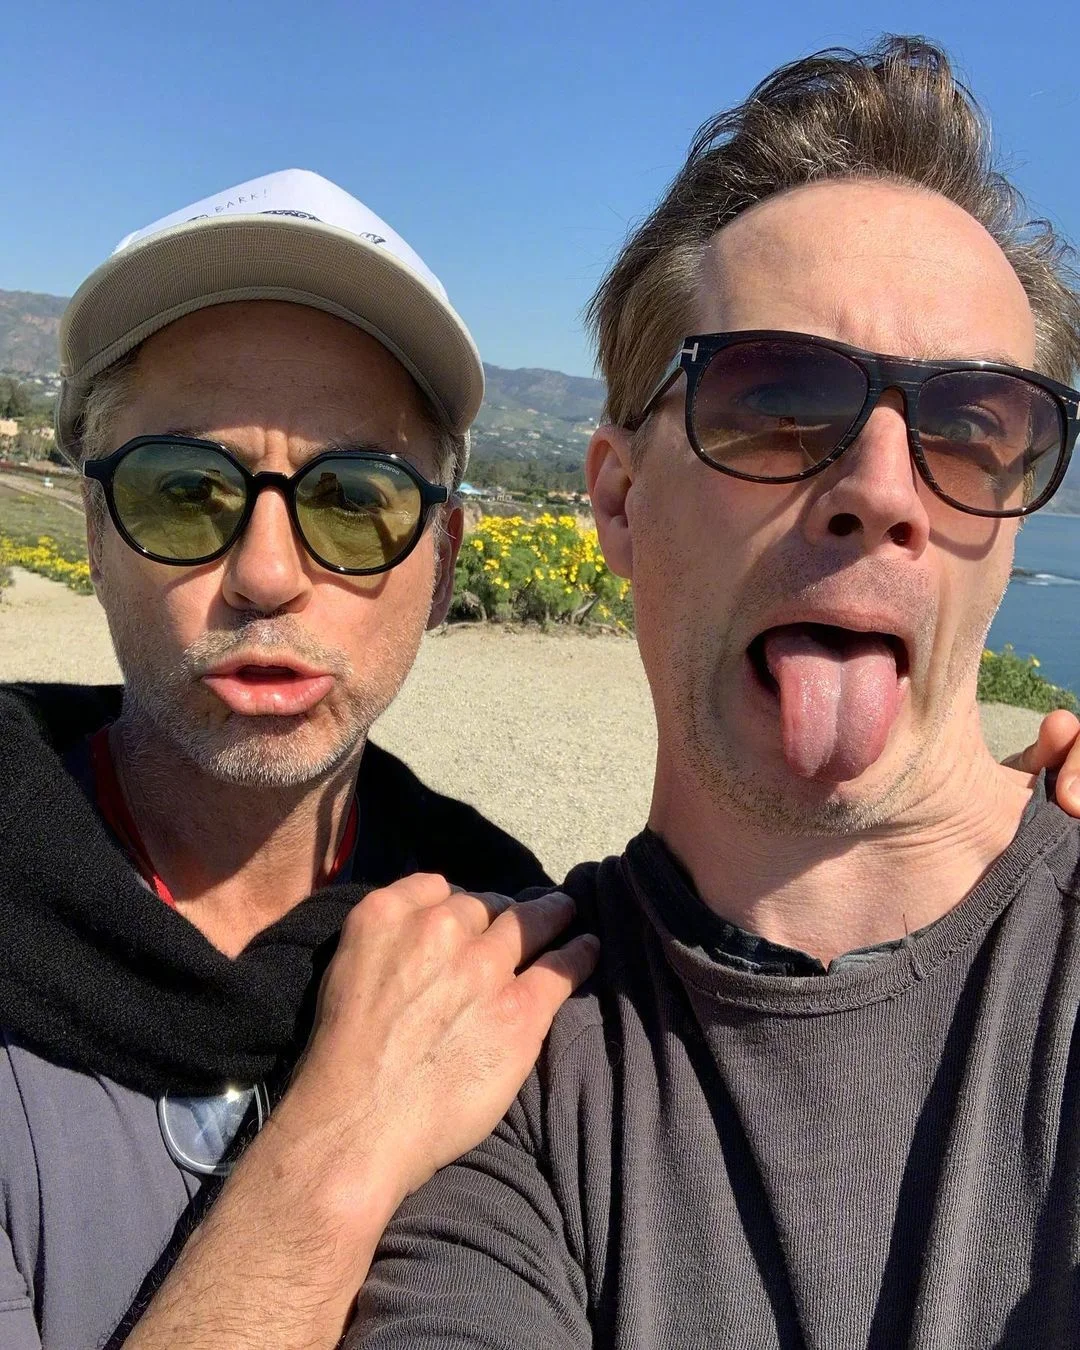 Robert Downey Jr. and James D'Arcy recently hiked together and posted a group photo